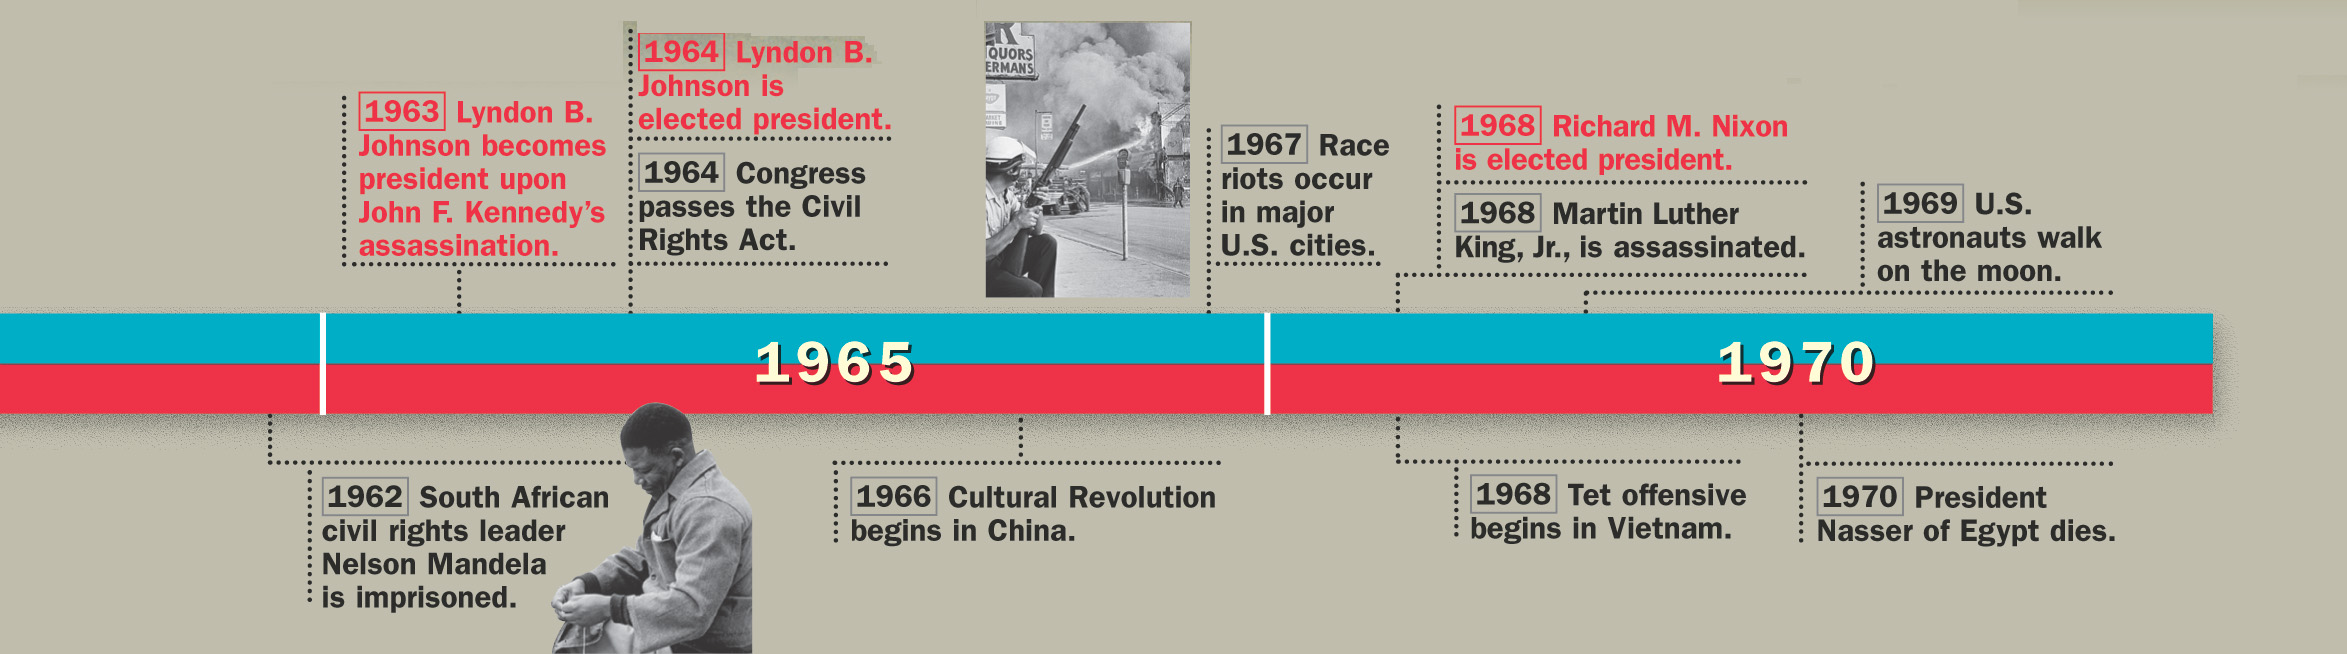 A timeline of historical events from 1954 to 1970 in both the U.S. and the world